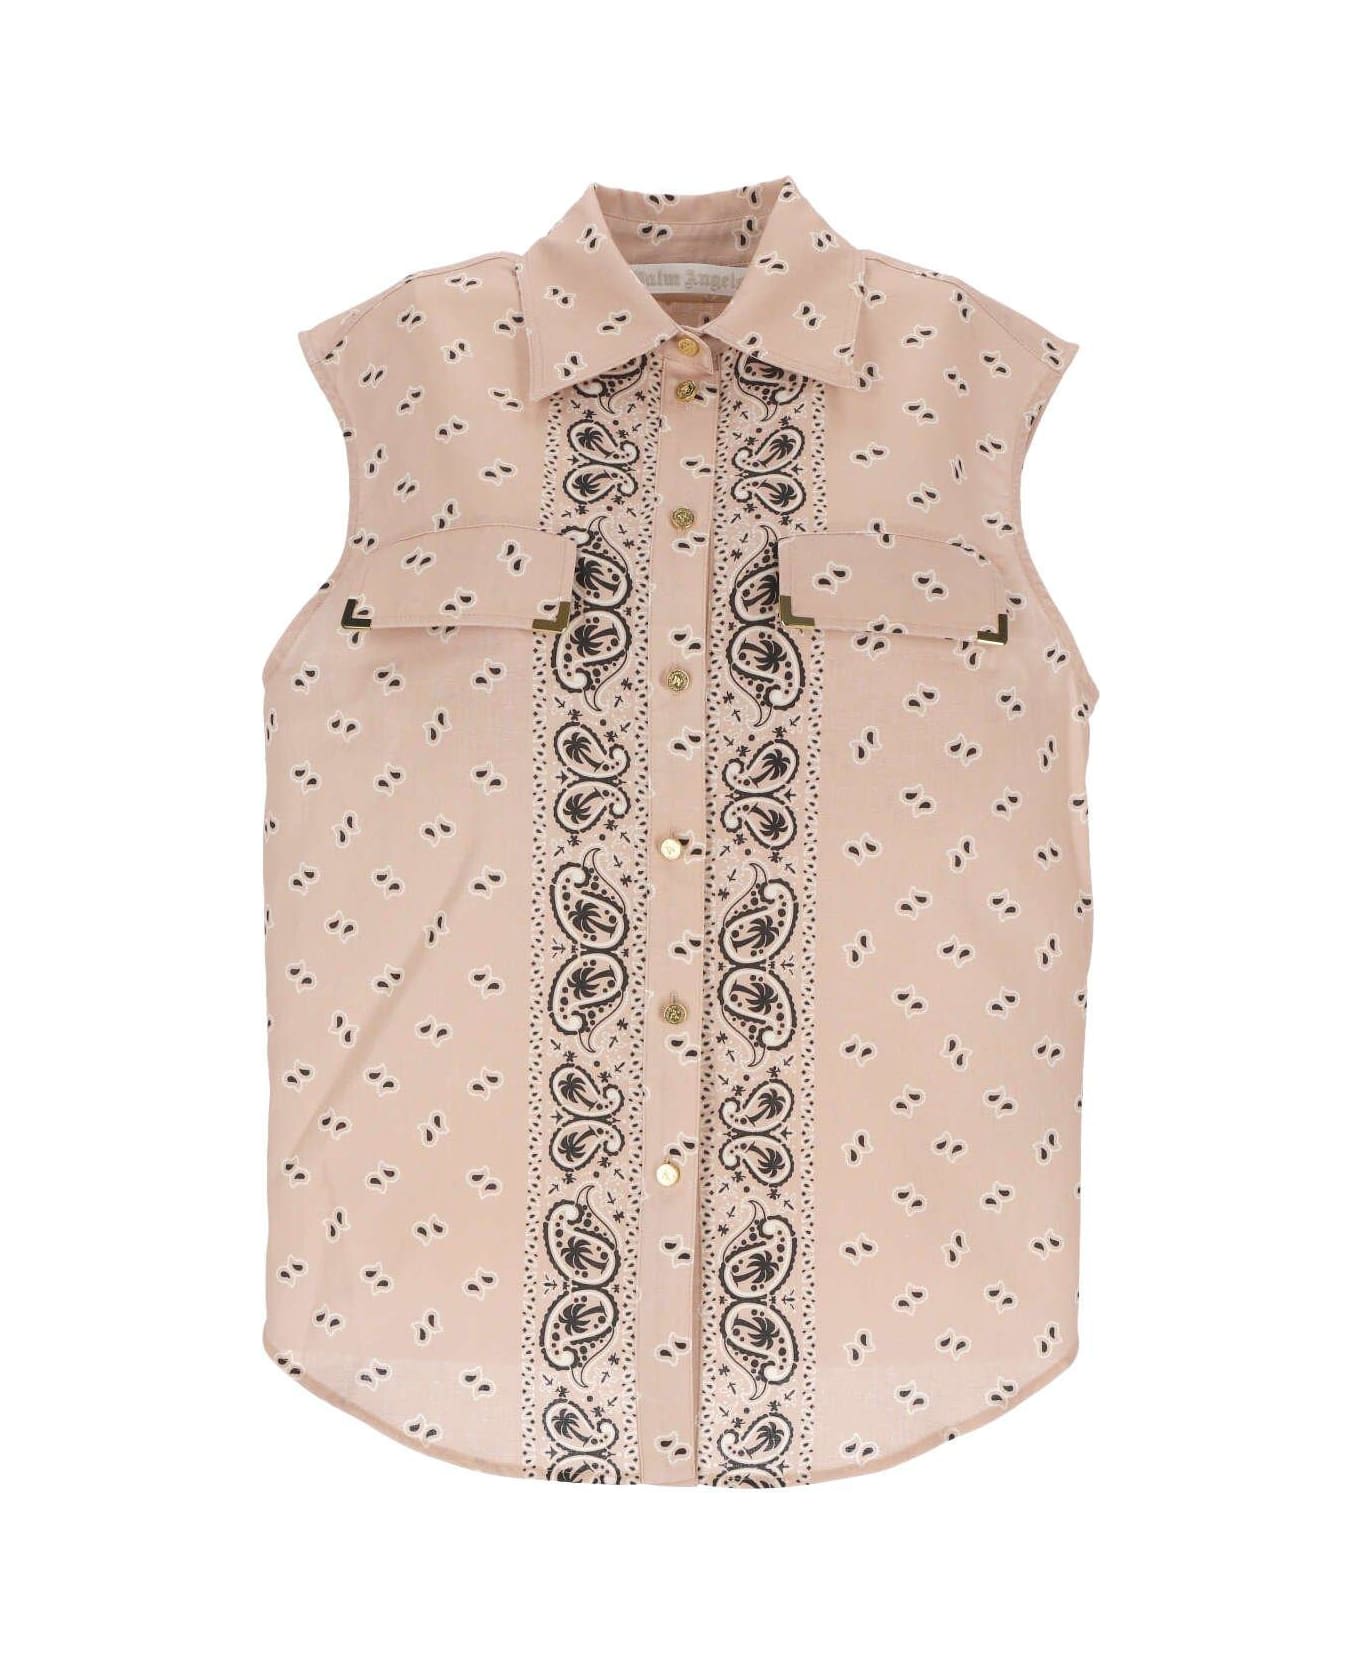 Palm Angels All-over Patterned Sleeveless Top - pink